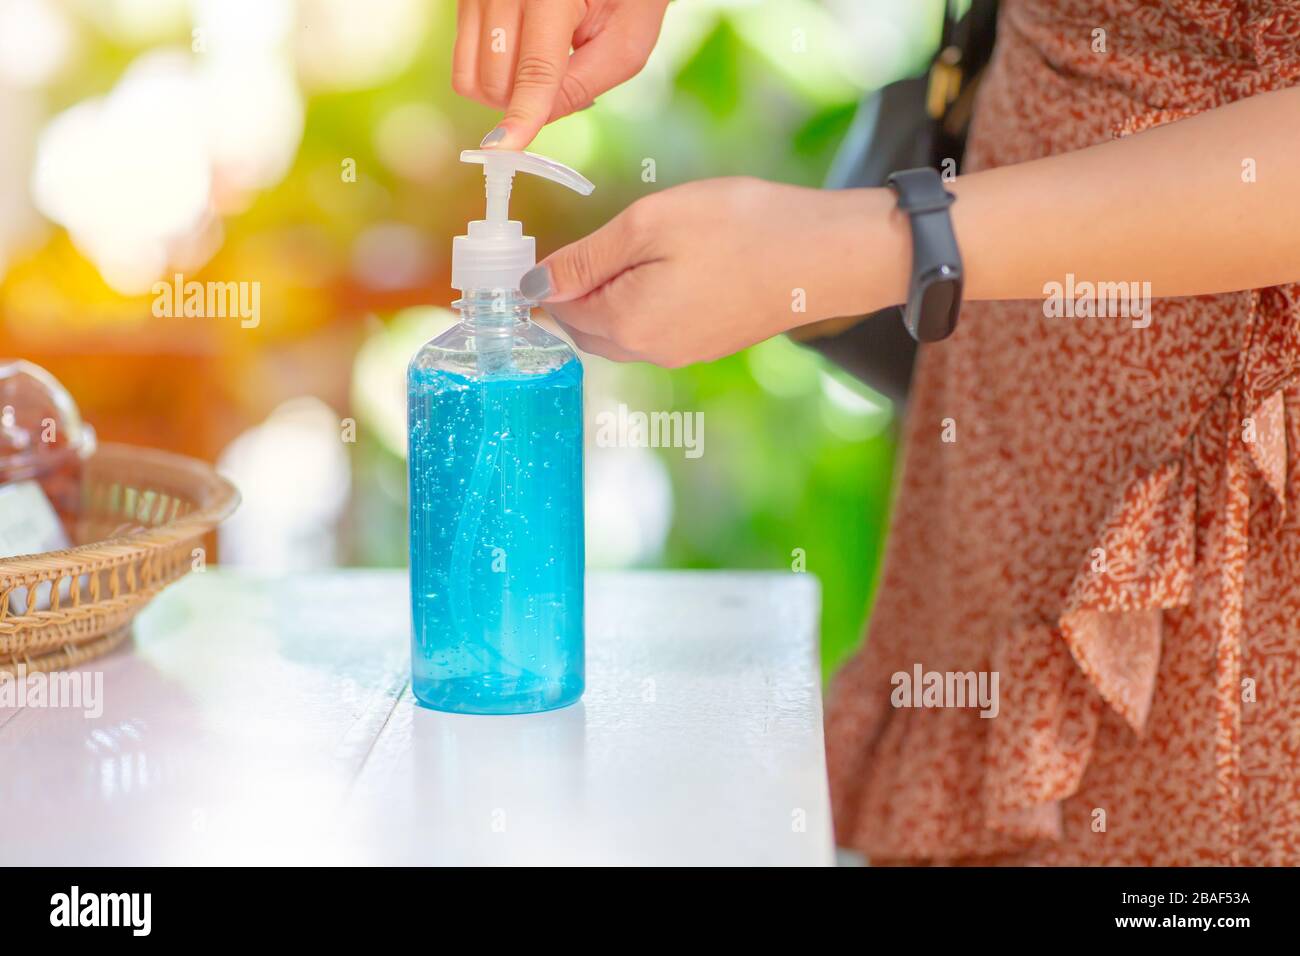 People cleaning hand using alcohol gel hand sanitizer cleaners for anti becteria and protect from Coronavirus Disease 2019 (COVID-19) virus outbreaks. Stock Photo